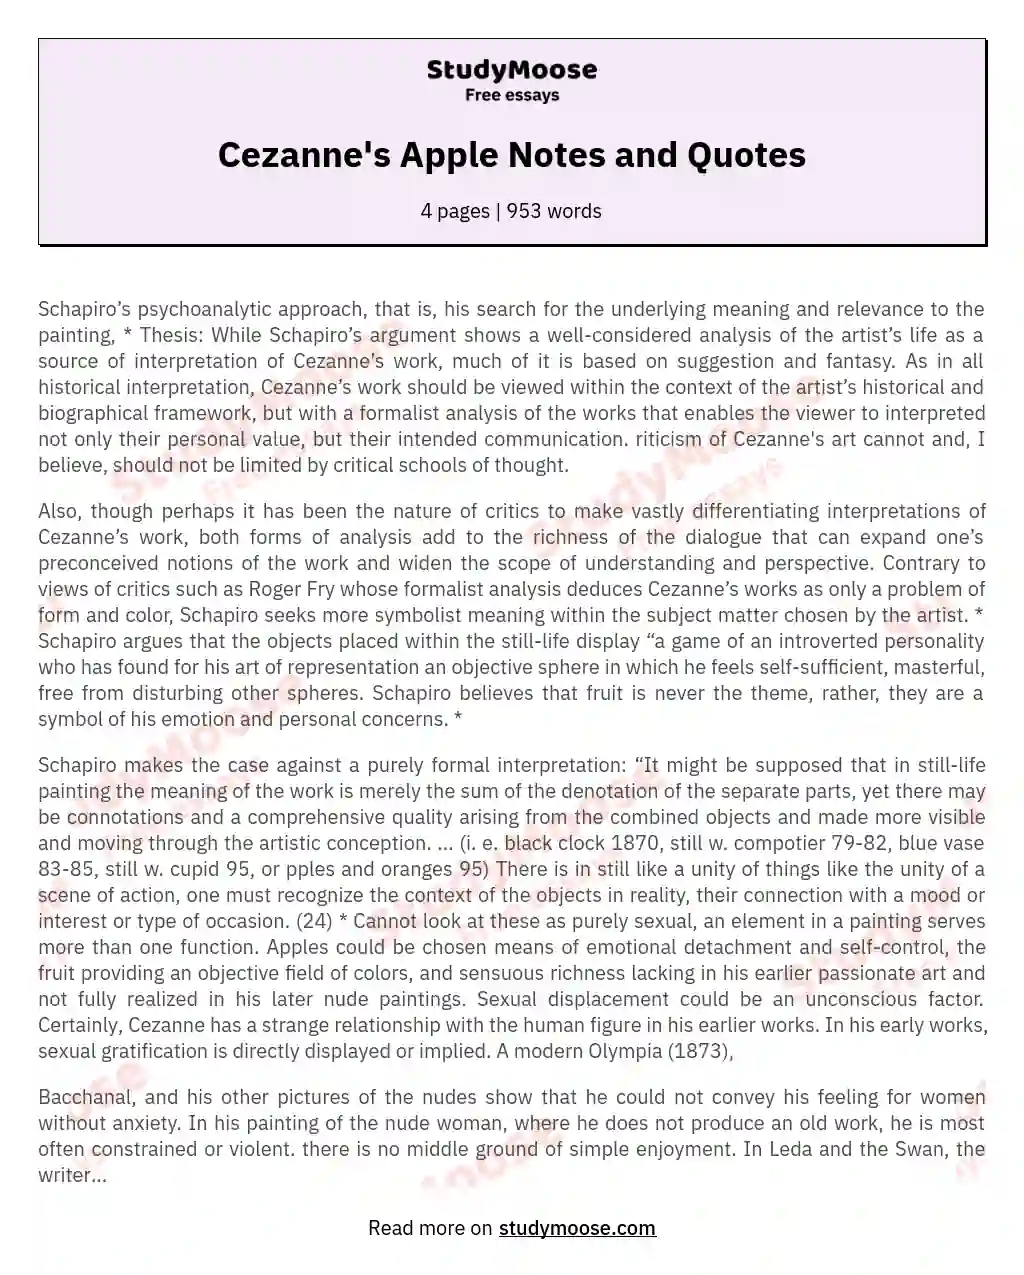 Cezanne's Apple Notes and Quotes